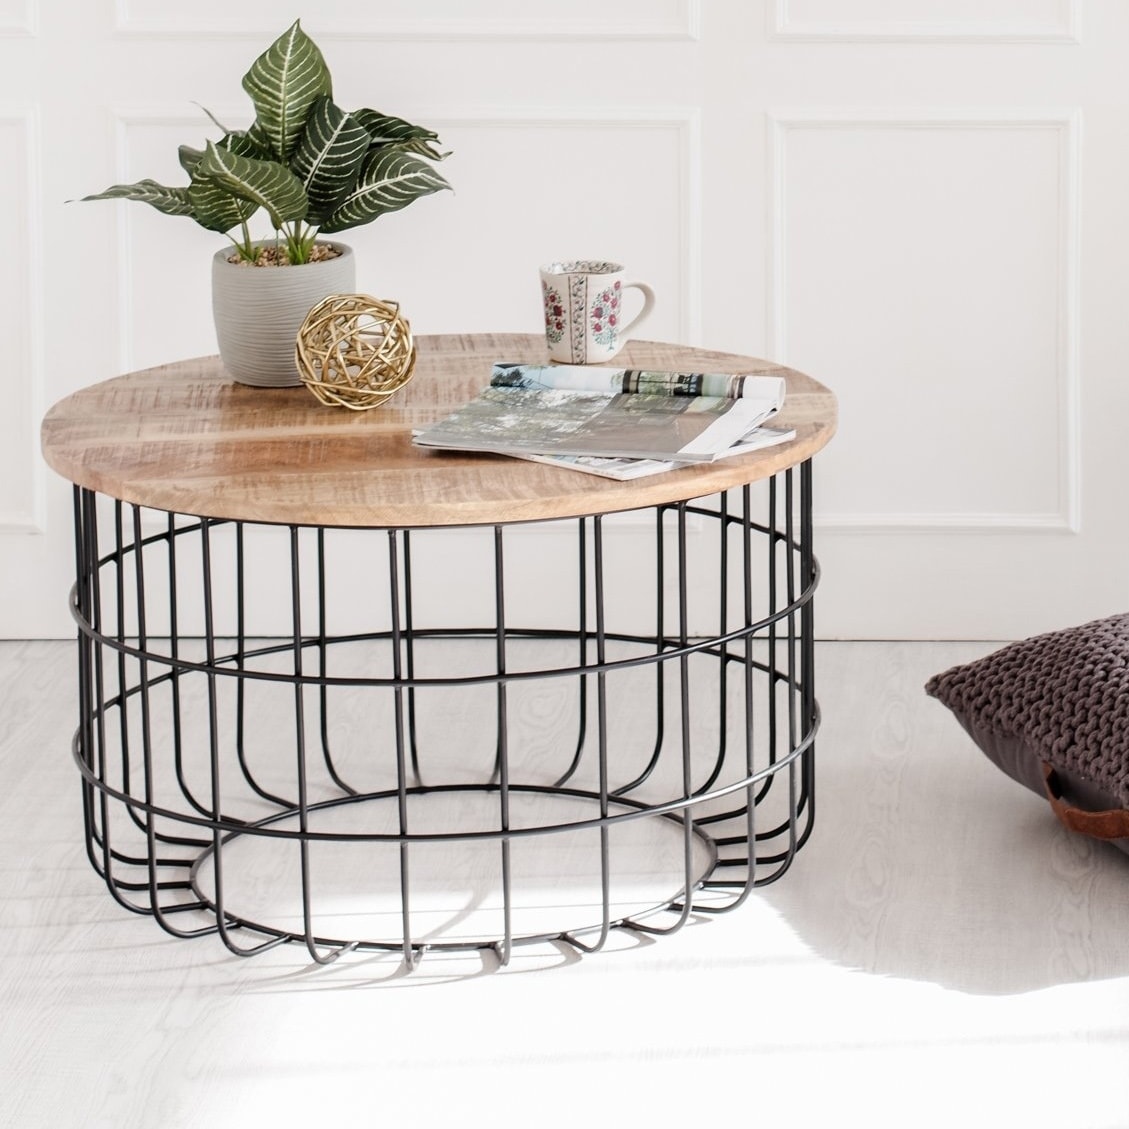 Carbon Loft Chessor Black And Natural Wood Cage Coffee Table On Sale Overstock 27865393 Rounded coffee table round top white and gold color metal and wood modern design furniture for living room retro style & ebook by easy&fundeals. carbon loft chessor black and natural wood cage coffee table